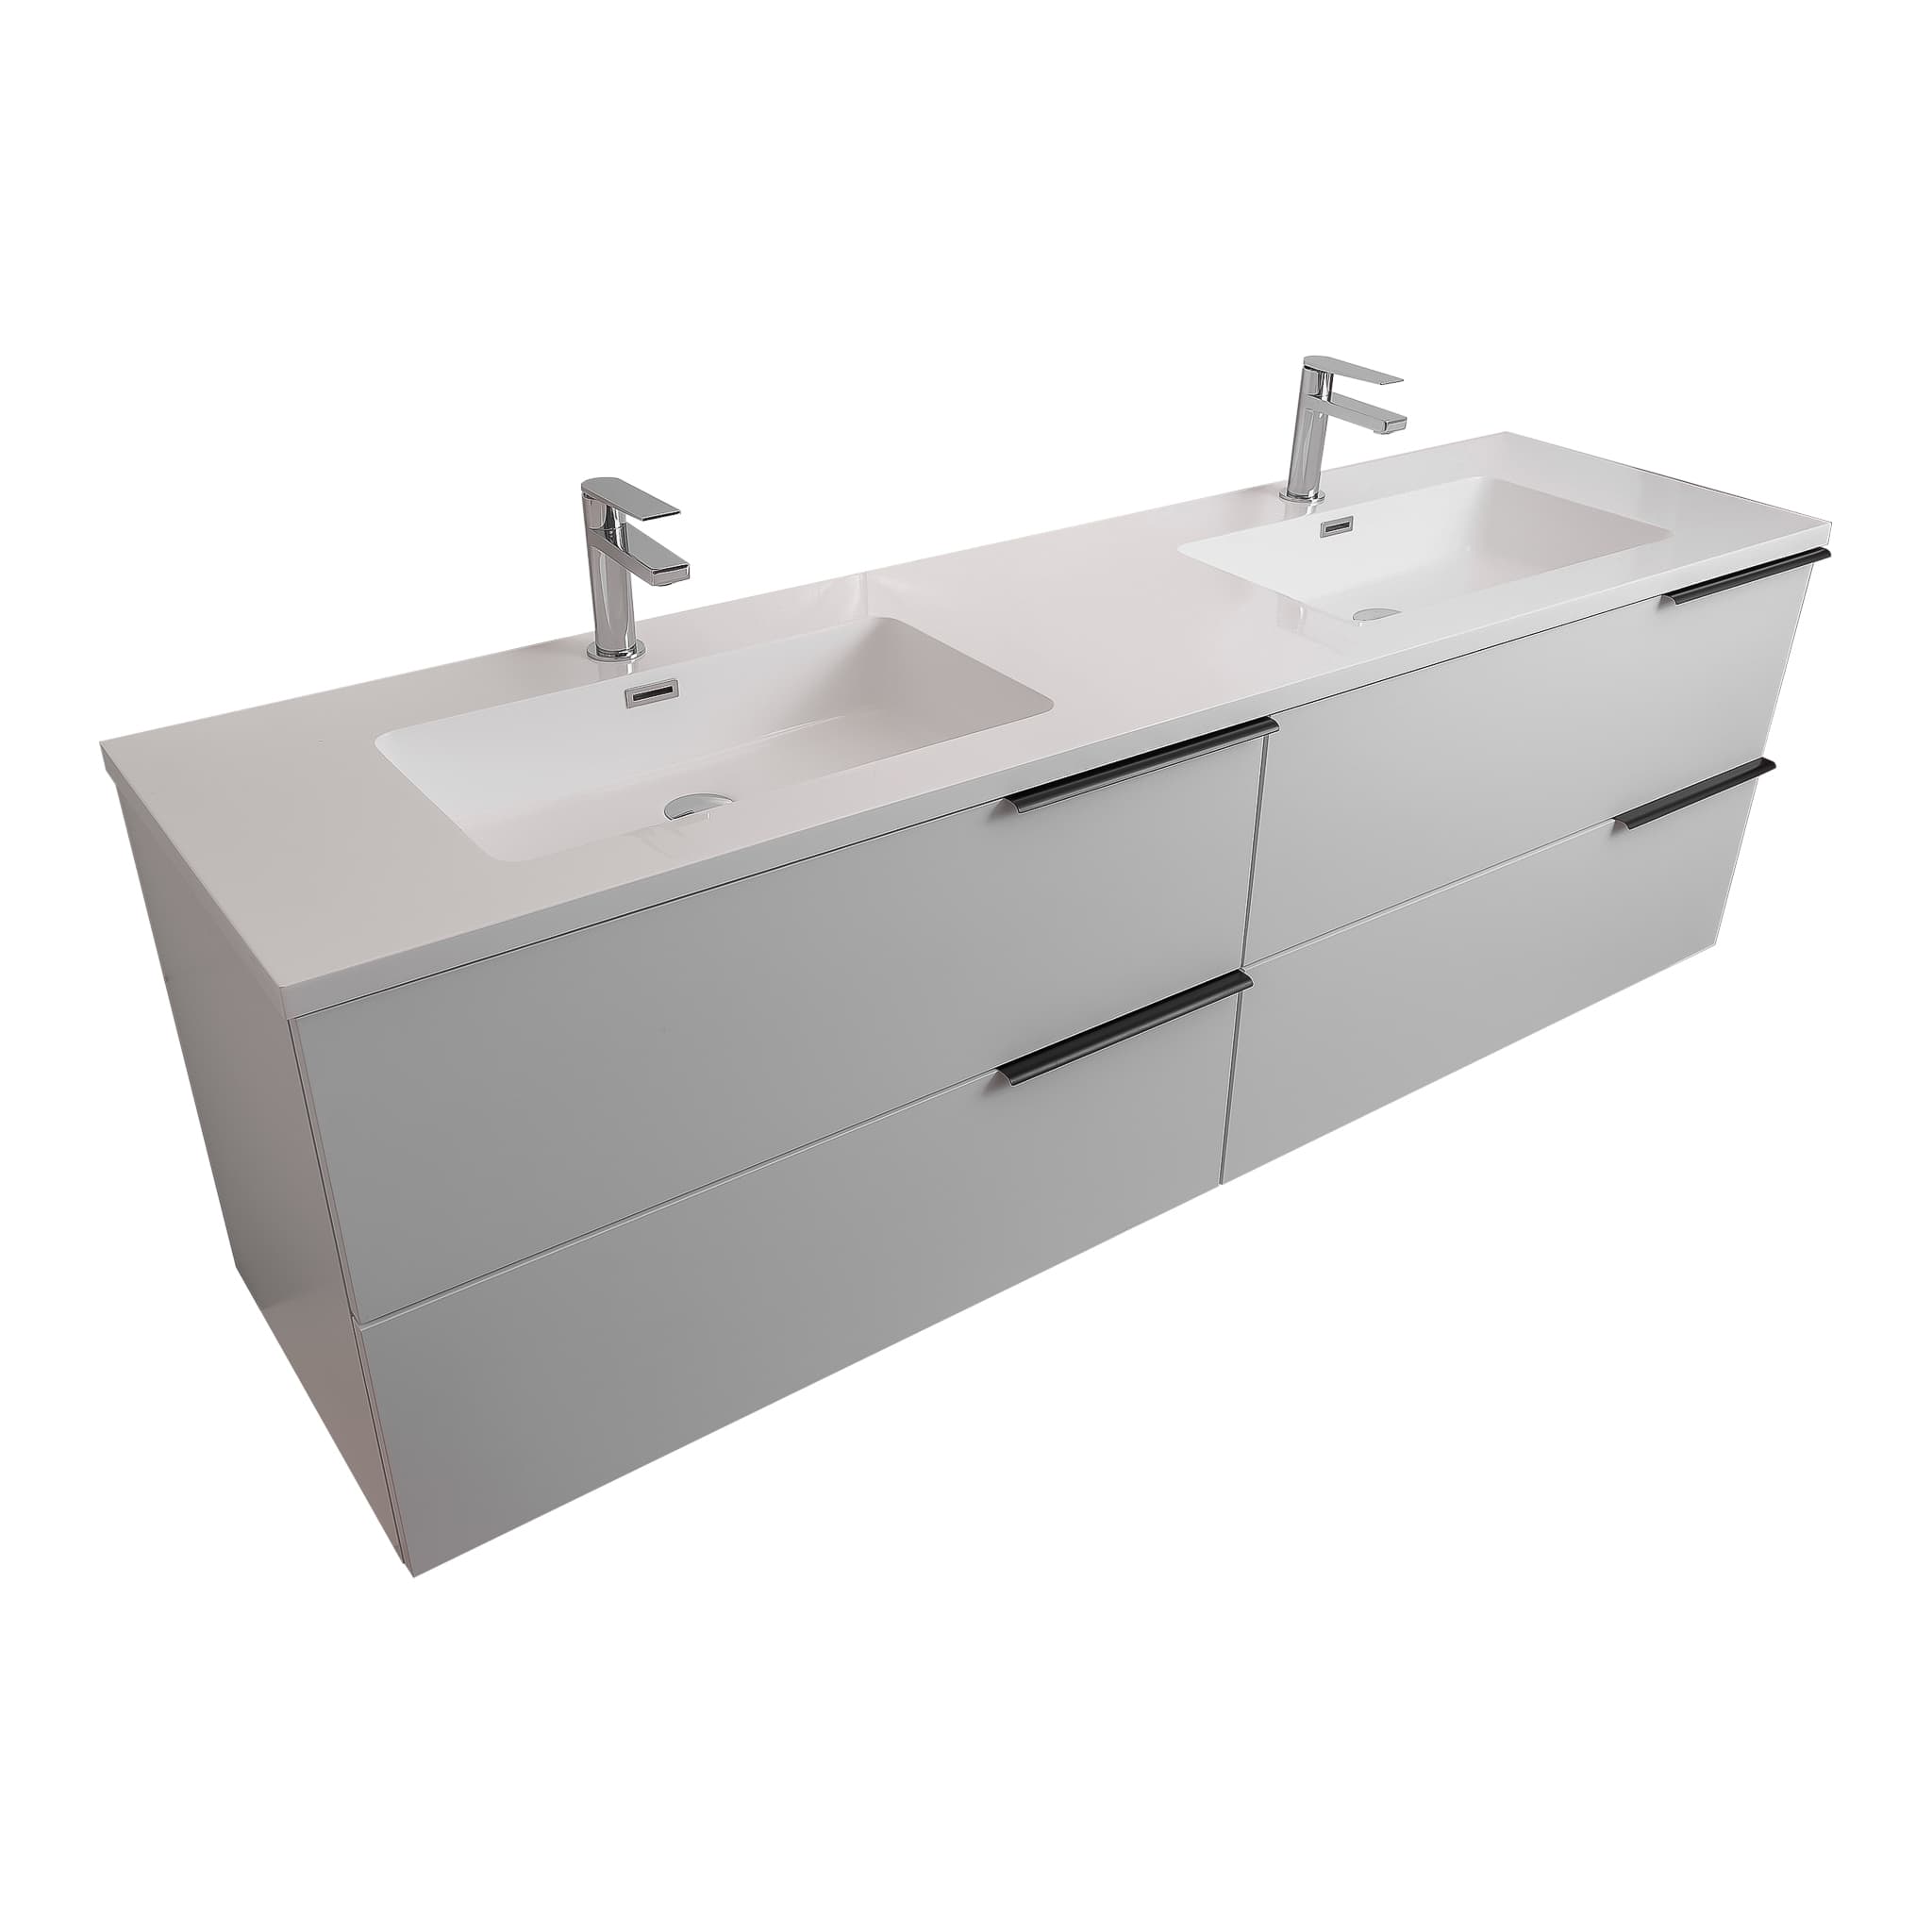 Mallorca 63 Matte White Cabinet, Square Cultured Marble Double Sink, Wall Mounted Modern Vanity Set